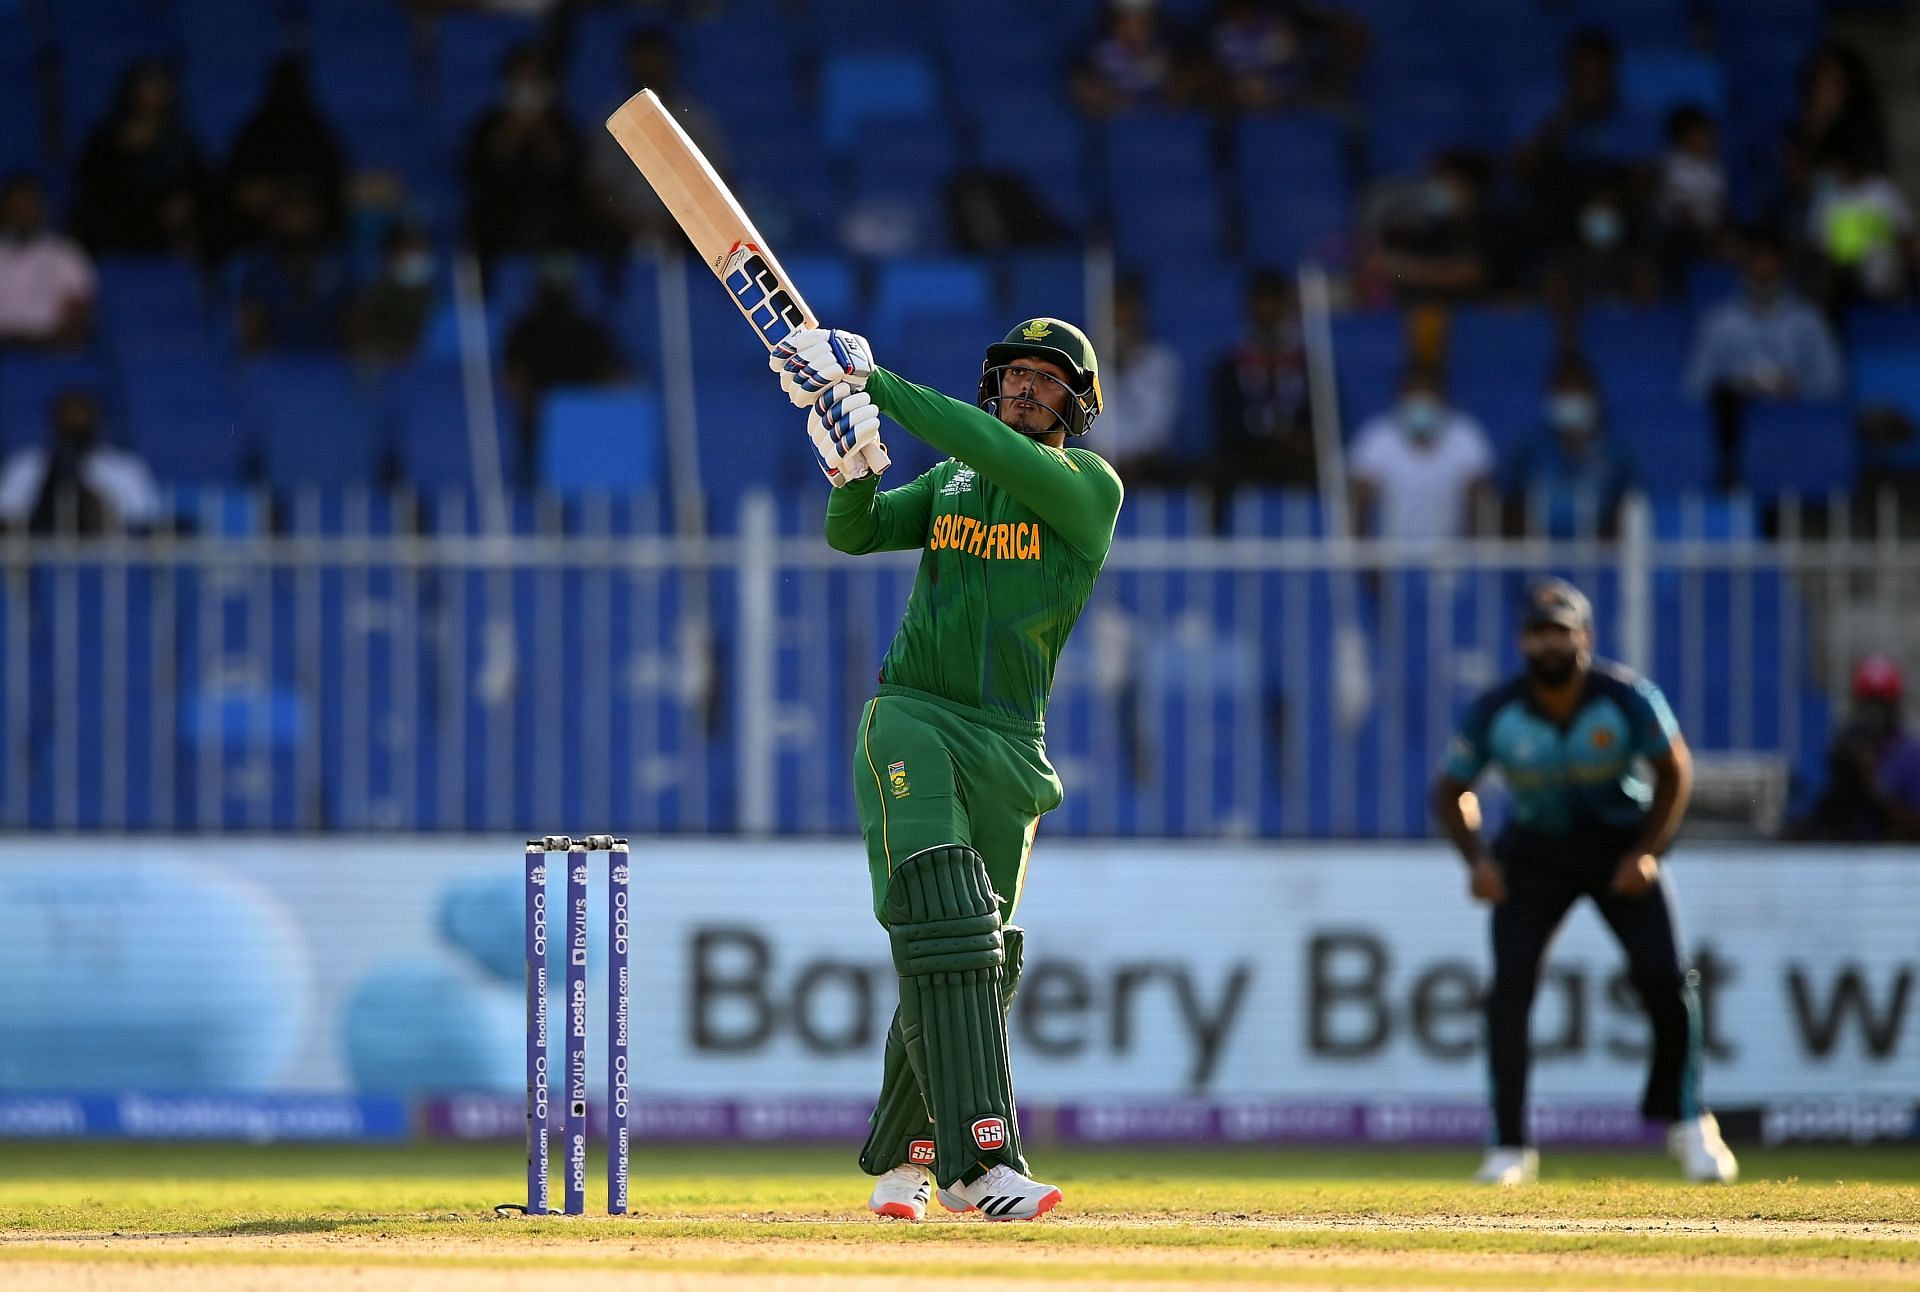 Quinton de Kock is due for a big knock for South Africa